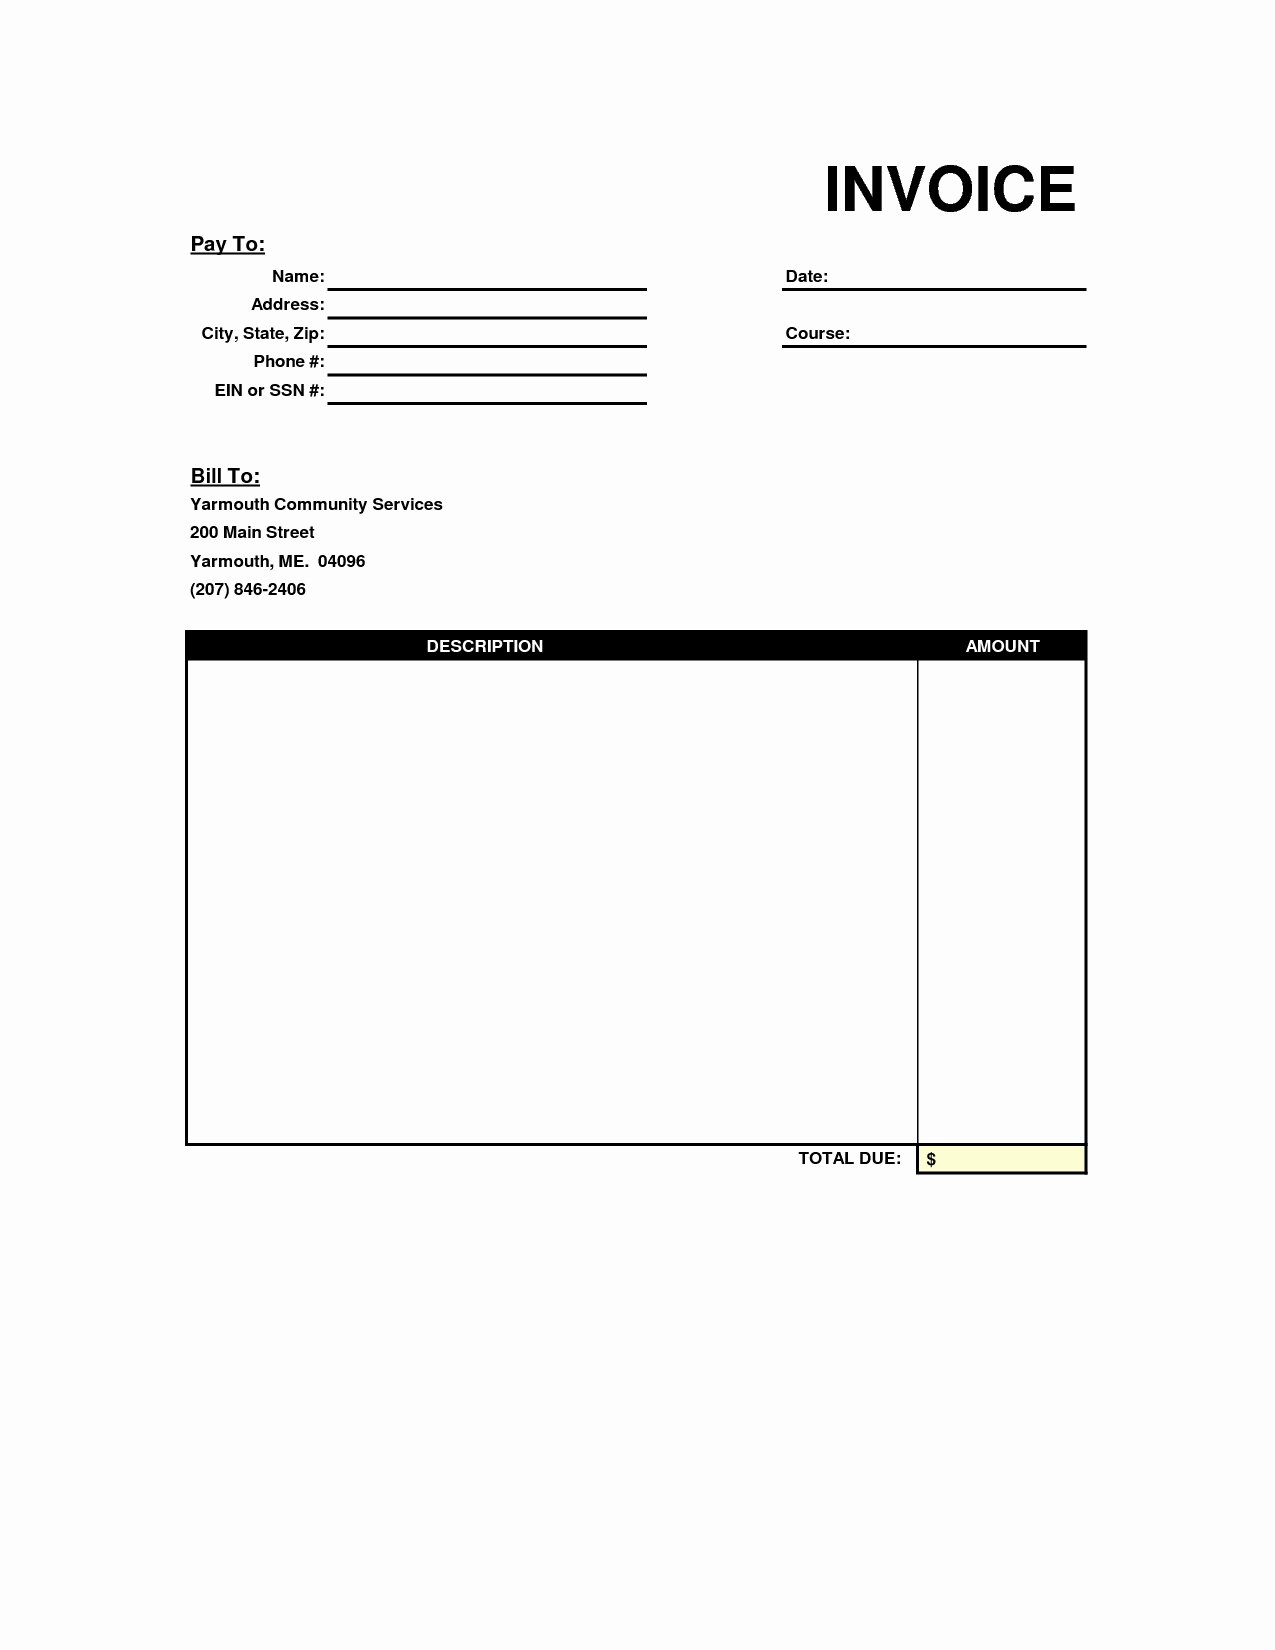 Blank Invoice Template Free New Free Fillable Invoice Template Invoice Template Ideas